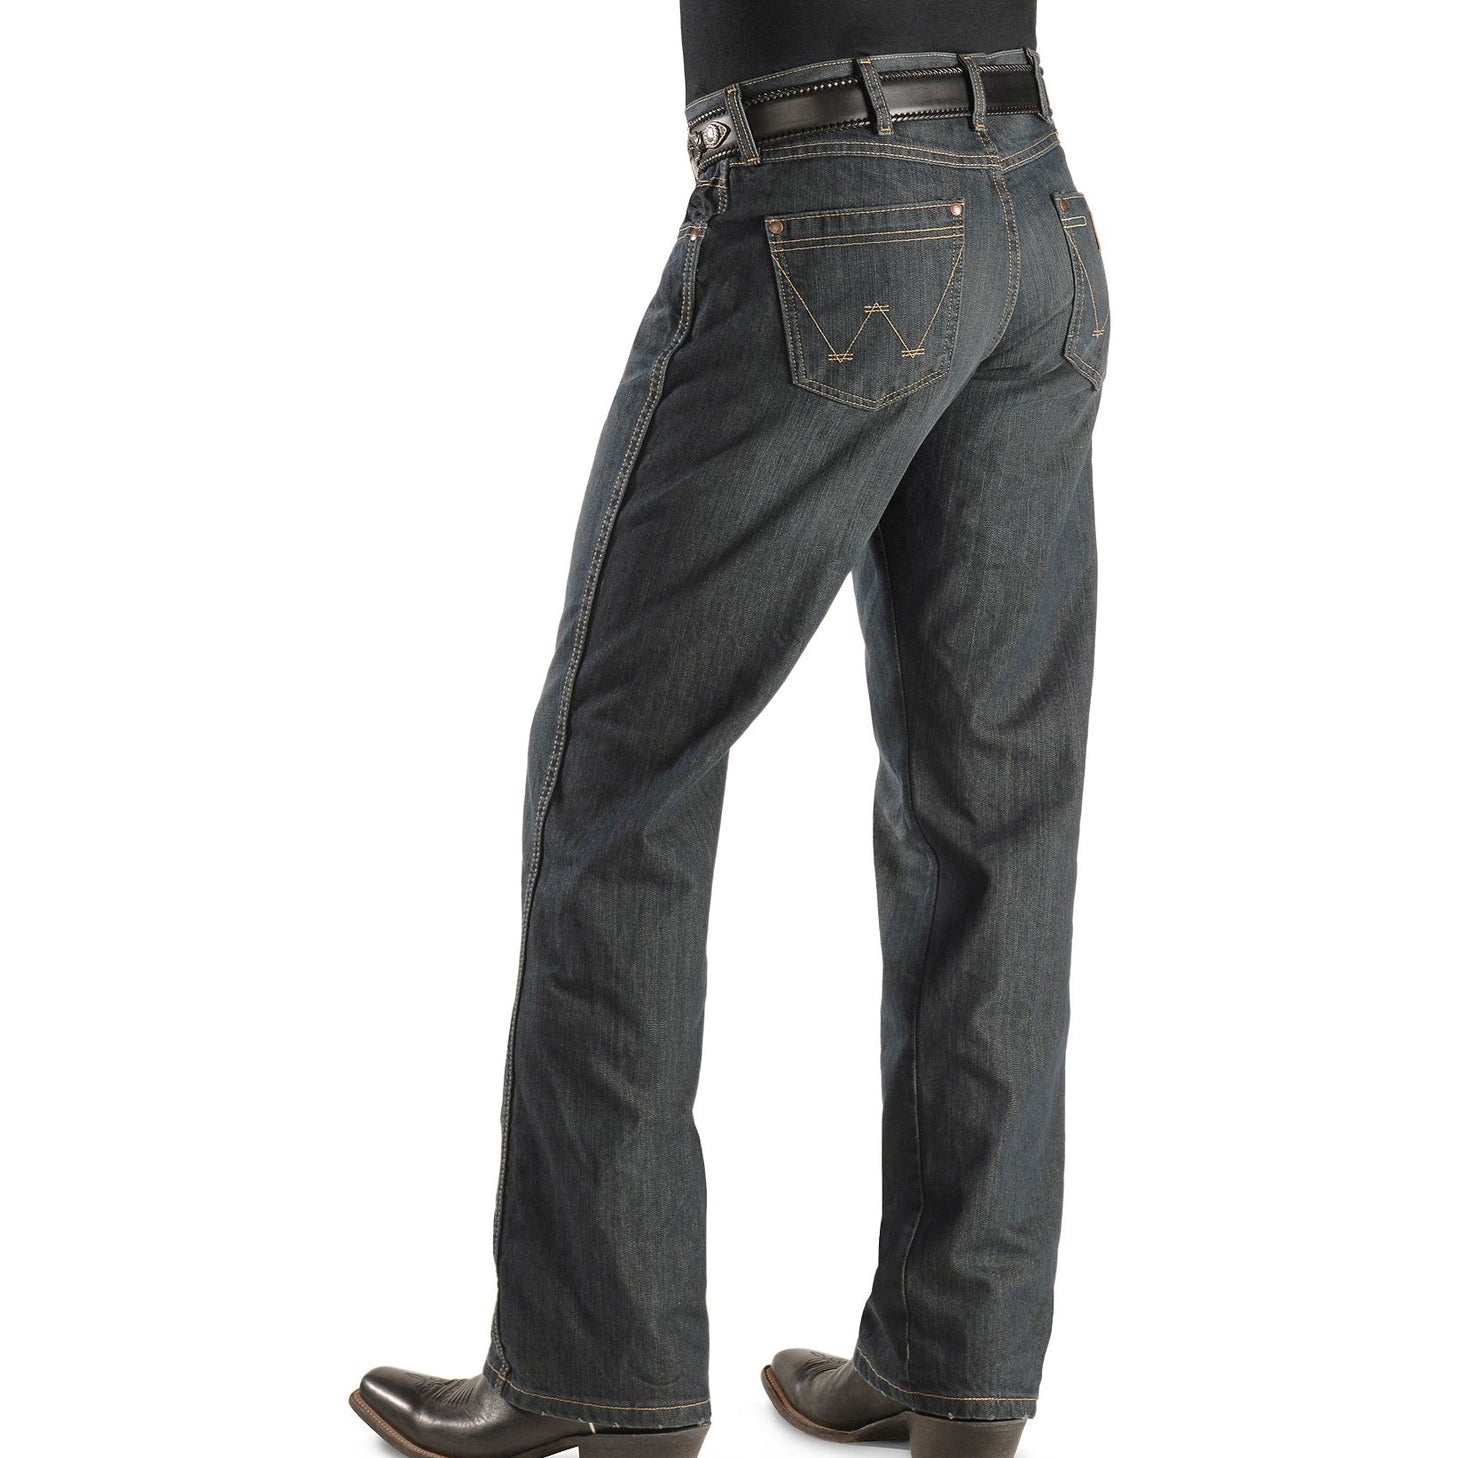 Wrangler Retro Boot Cut and Relaxed Fit 